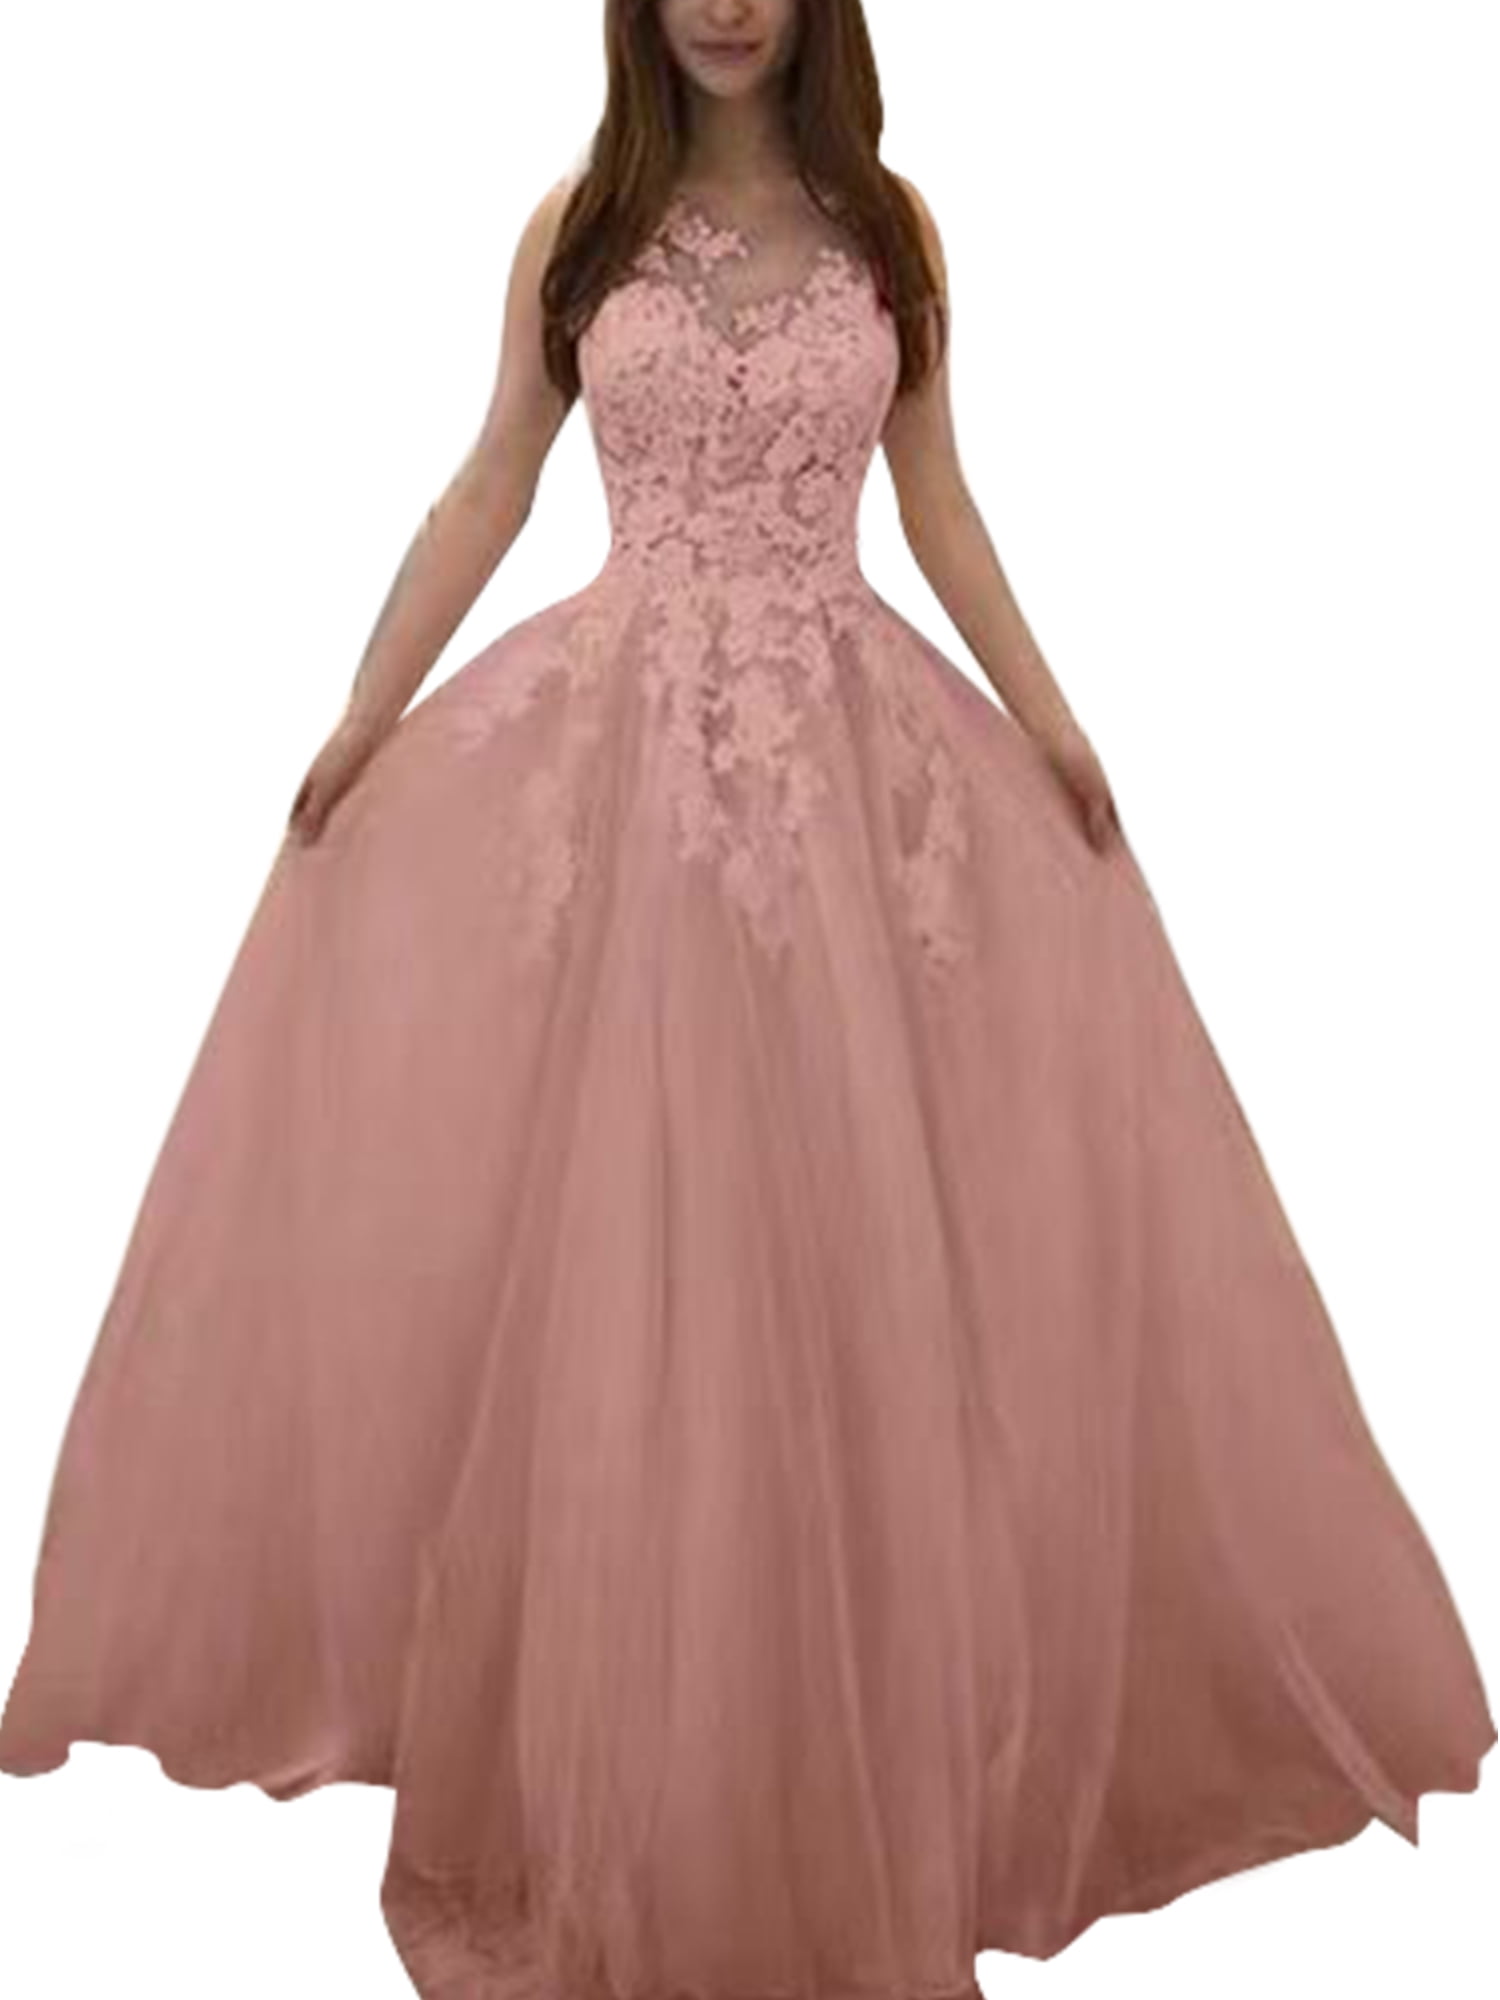 Long Chiffon Lace Evening Formal Party Ball Gown Prom Bridesmaid Dress Size 6~26 